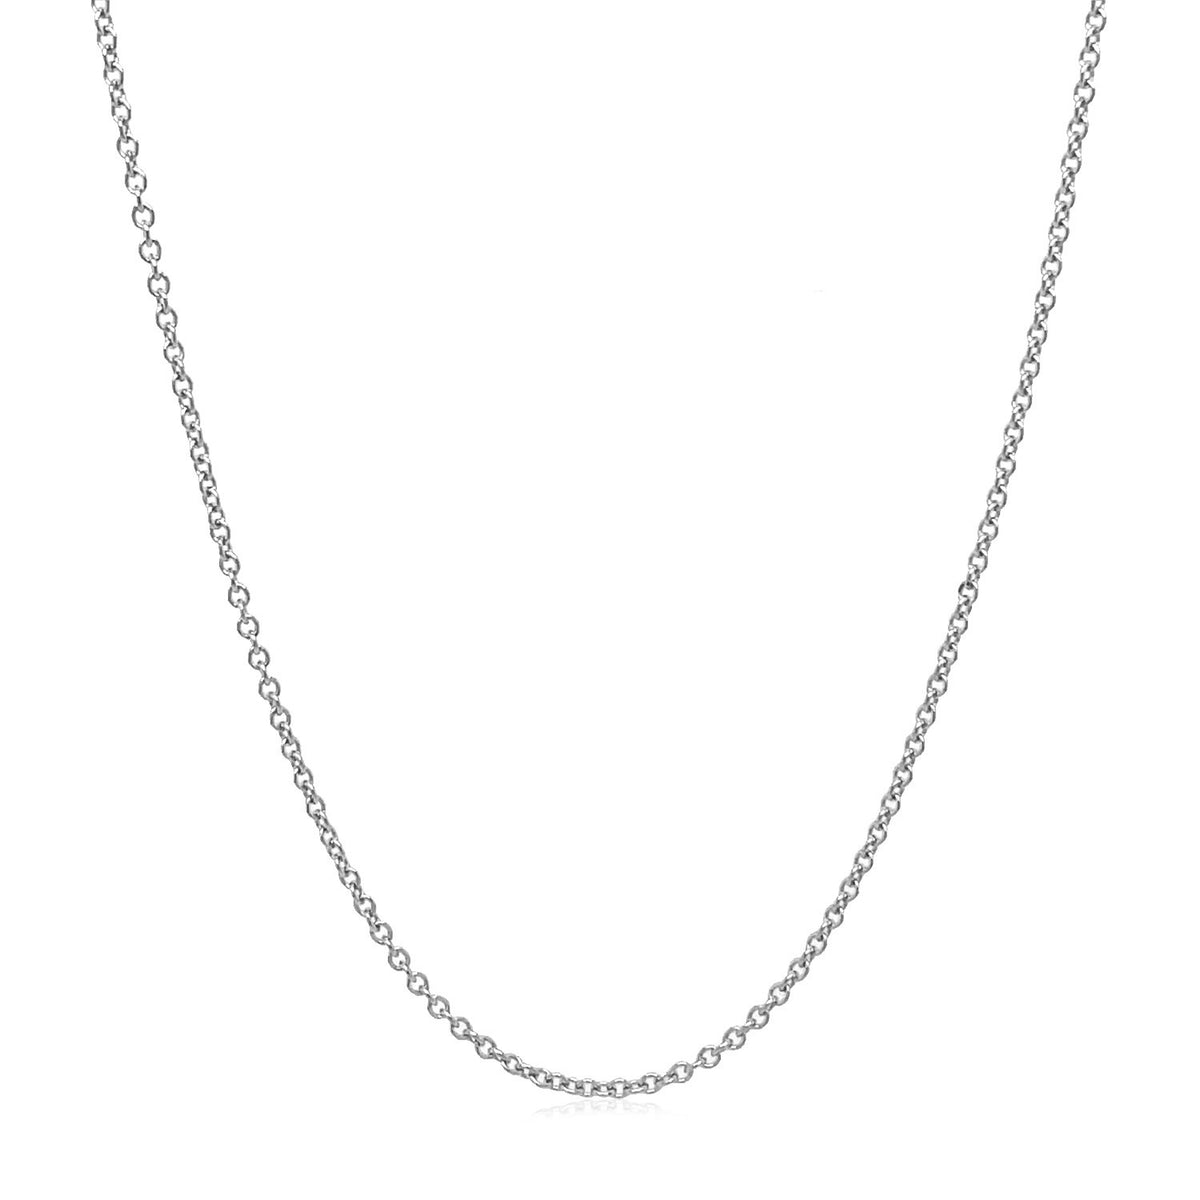 Round Cable Link Chain - 14k White Gold 1.30mm